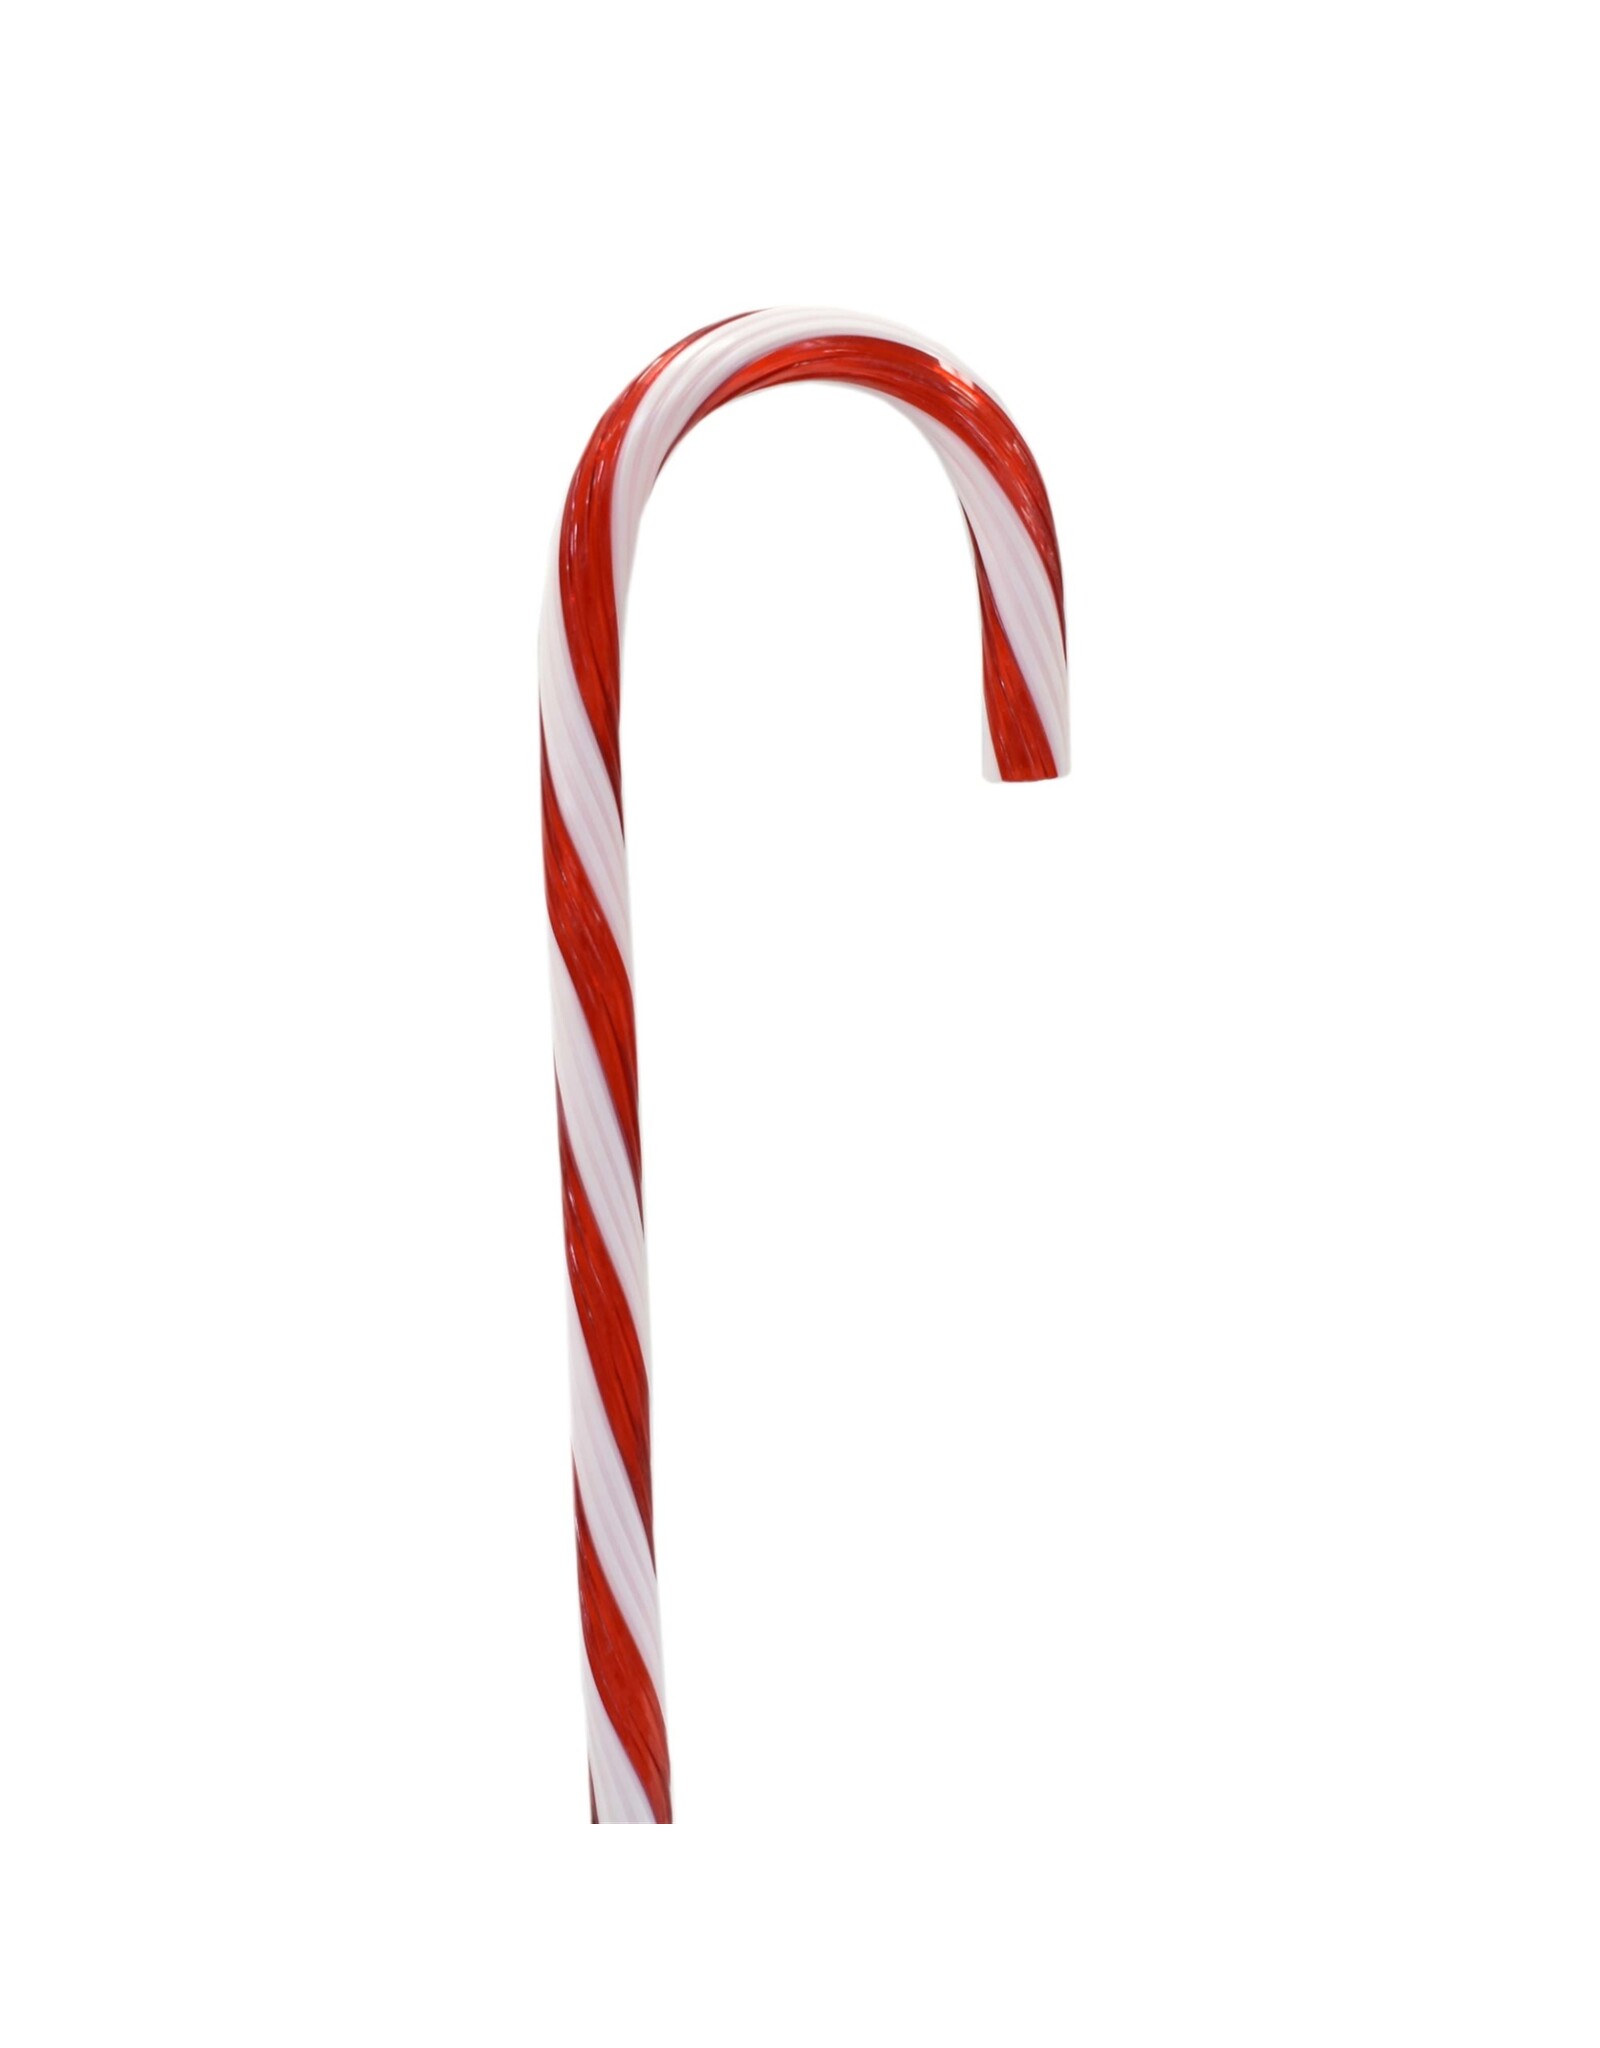 David Christophers Red White Candy Cane Ornament Decoration 18 Inch